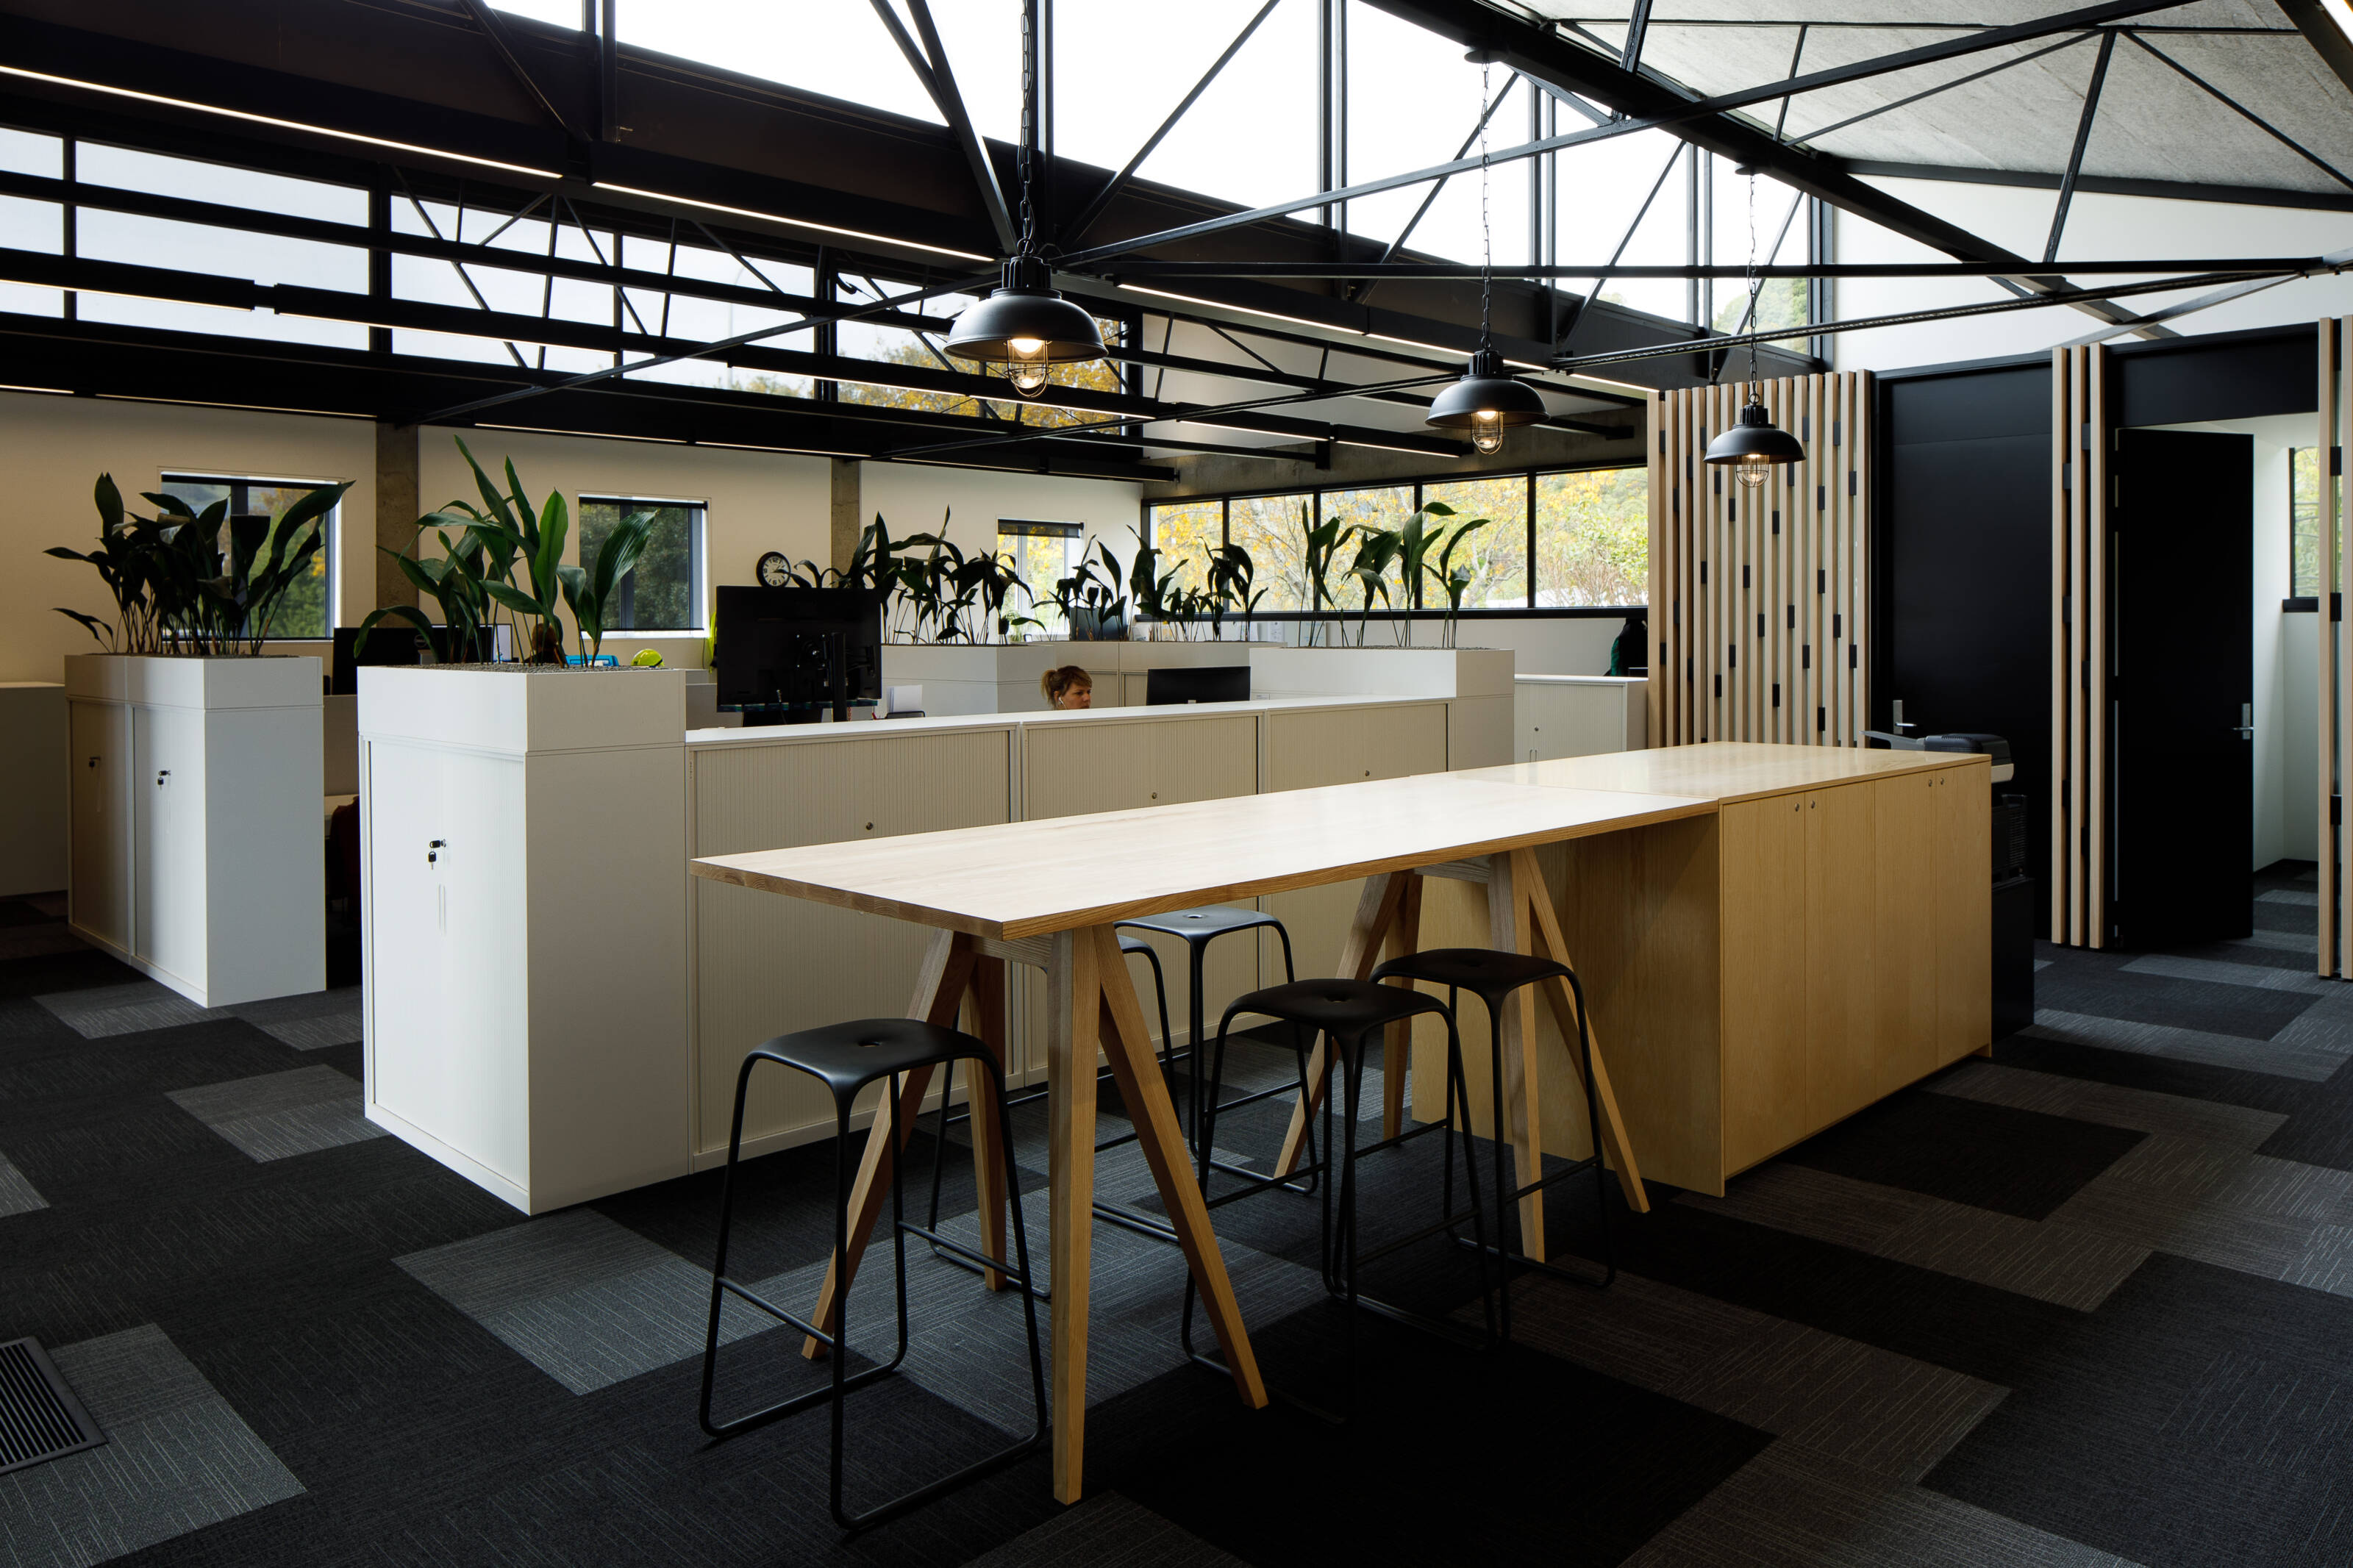 The adaptive reuse refurbishment of the Port Nelson offices transforms a 1950's warehouse into a modern, open plan workplace.